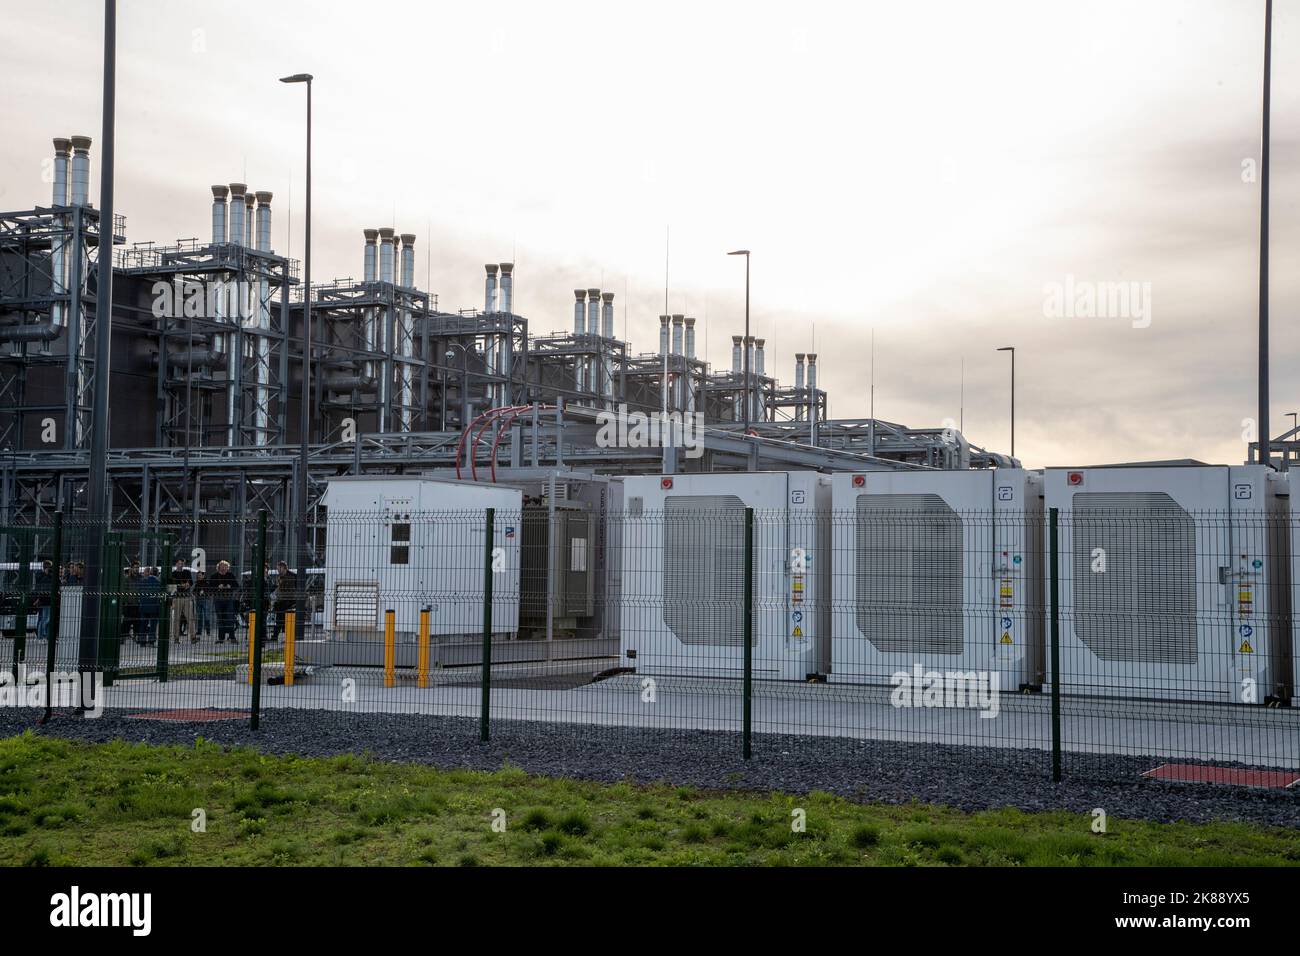 Illustration picture shows the emergency batteries replacing the  conventional diesel generators during a visit to the Google company in  Ghlin on the occasion of the 15th anniversary of the Google data centre